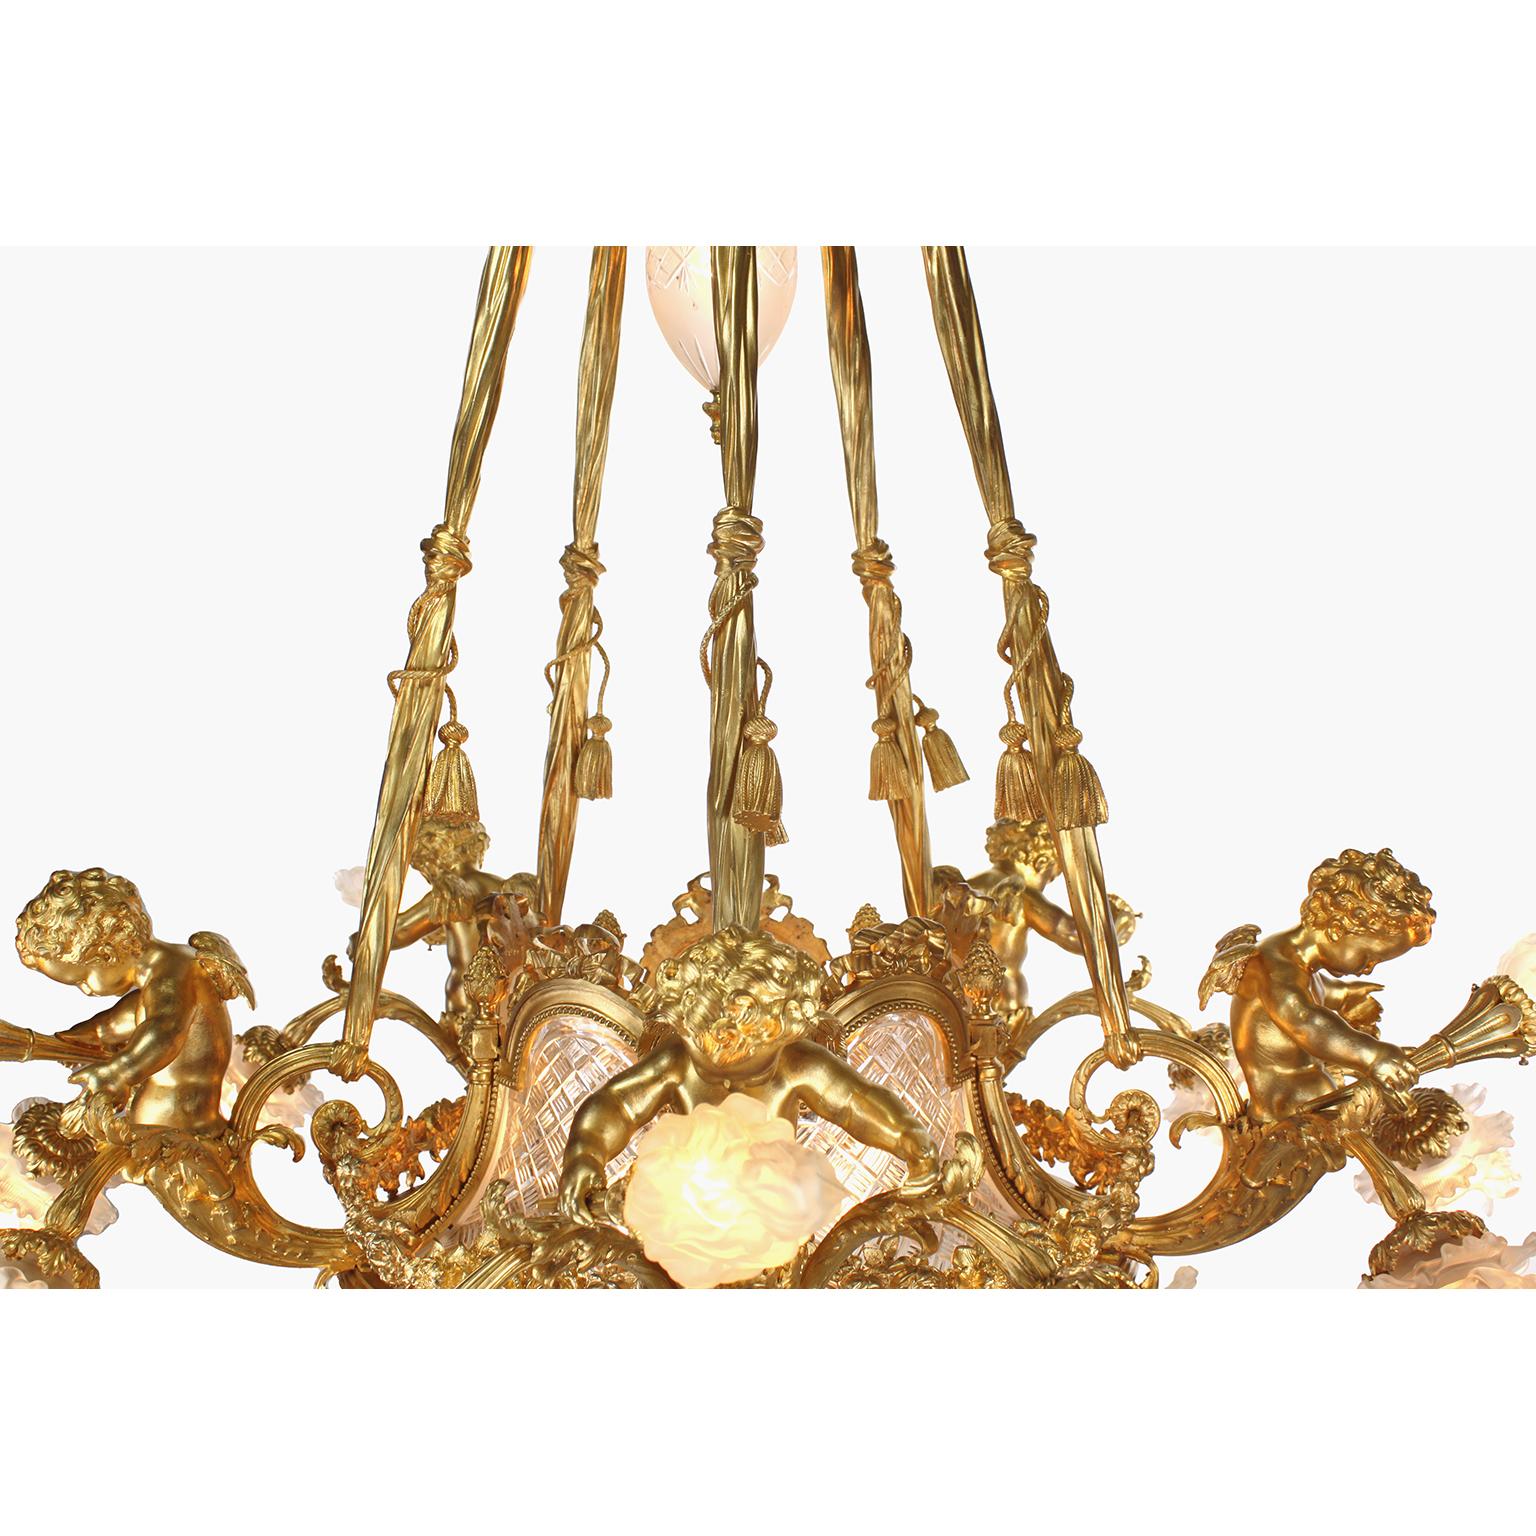 Fine French 19th-20th Century Louis XV Style Gilt Bronze and Baccarat Chandelier For Sale 9